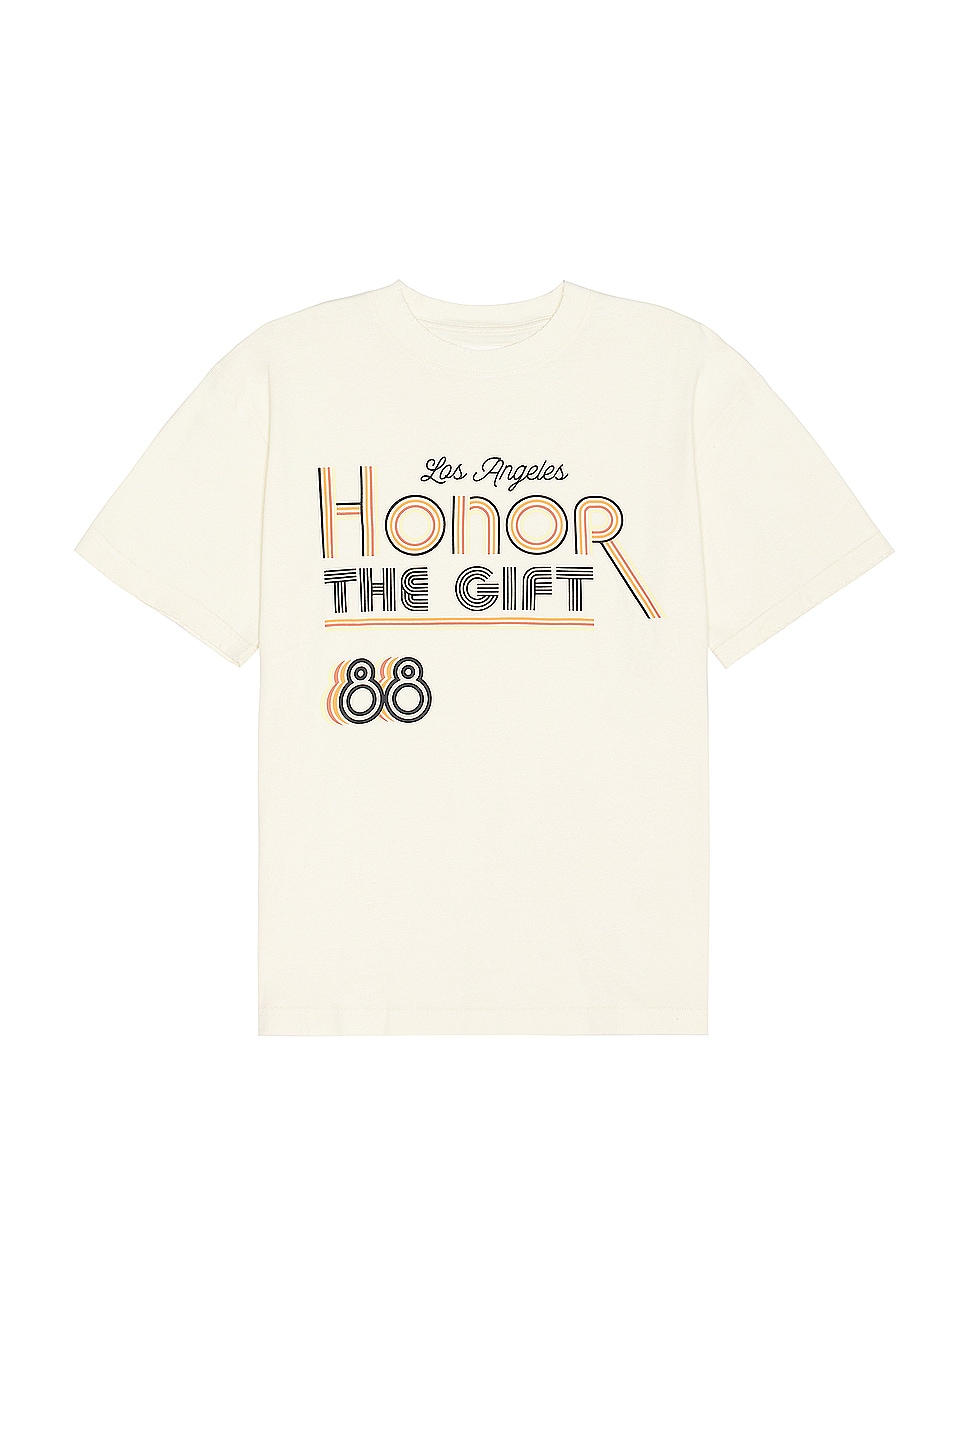 A-spring Retro Honor Tee in Nude